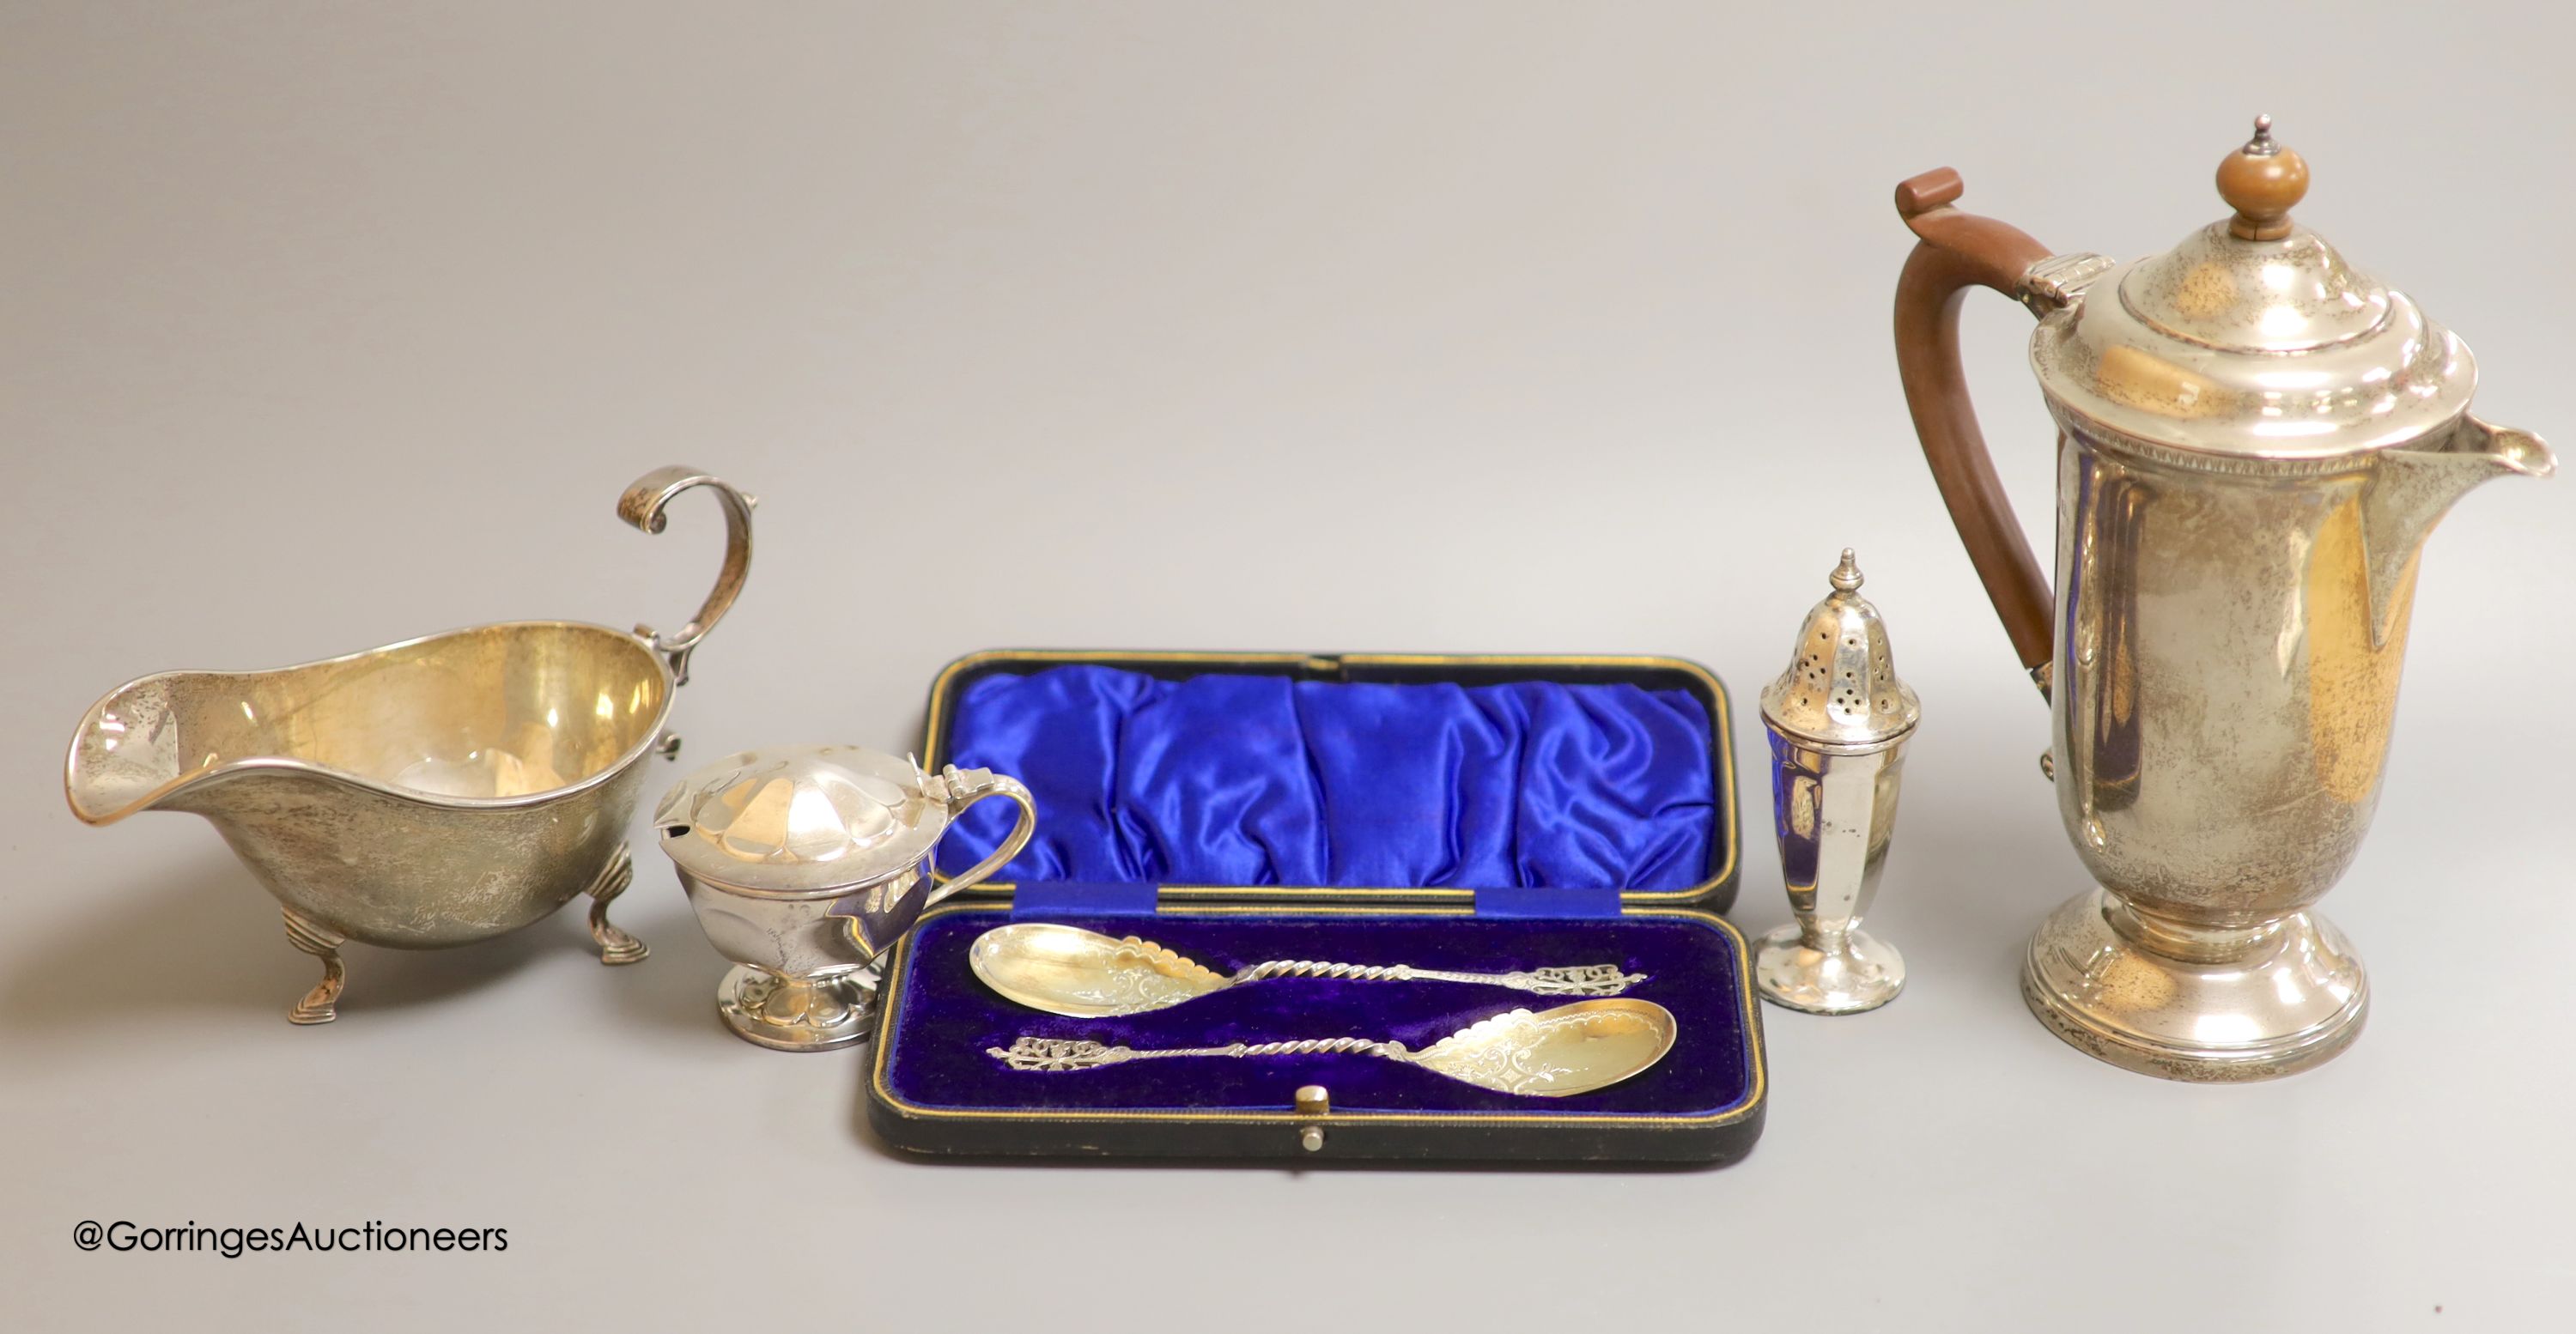 A cased pair of ornate Edwardian silver preserve spoons, Sheffield, 1905, a silver sauceboat, a silver hot water pot and two silver condiments